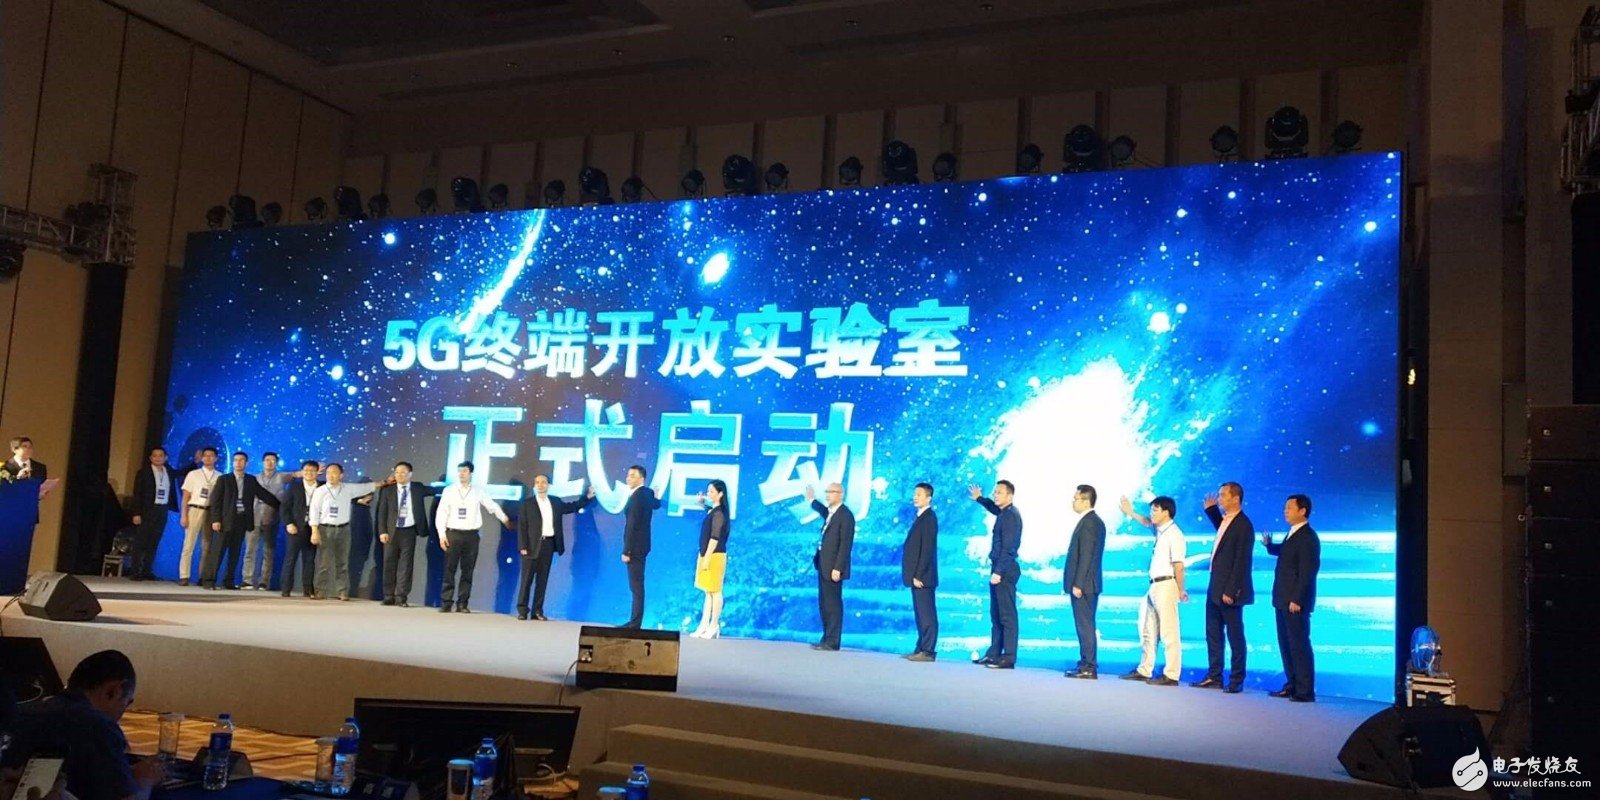 China Telecom's 5G terminal open laboratory has been officially launched